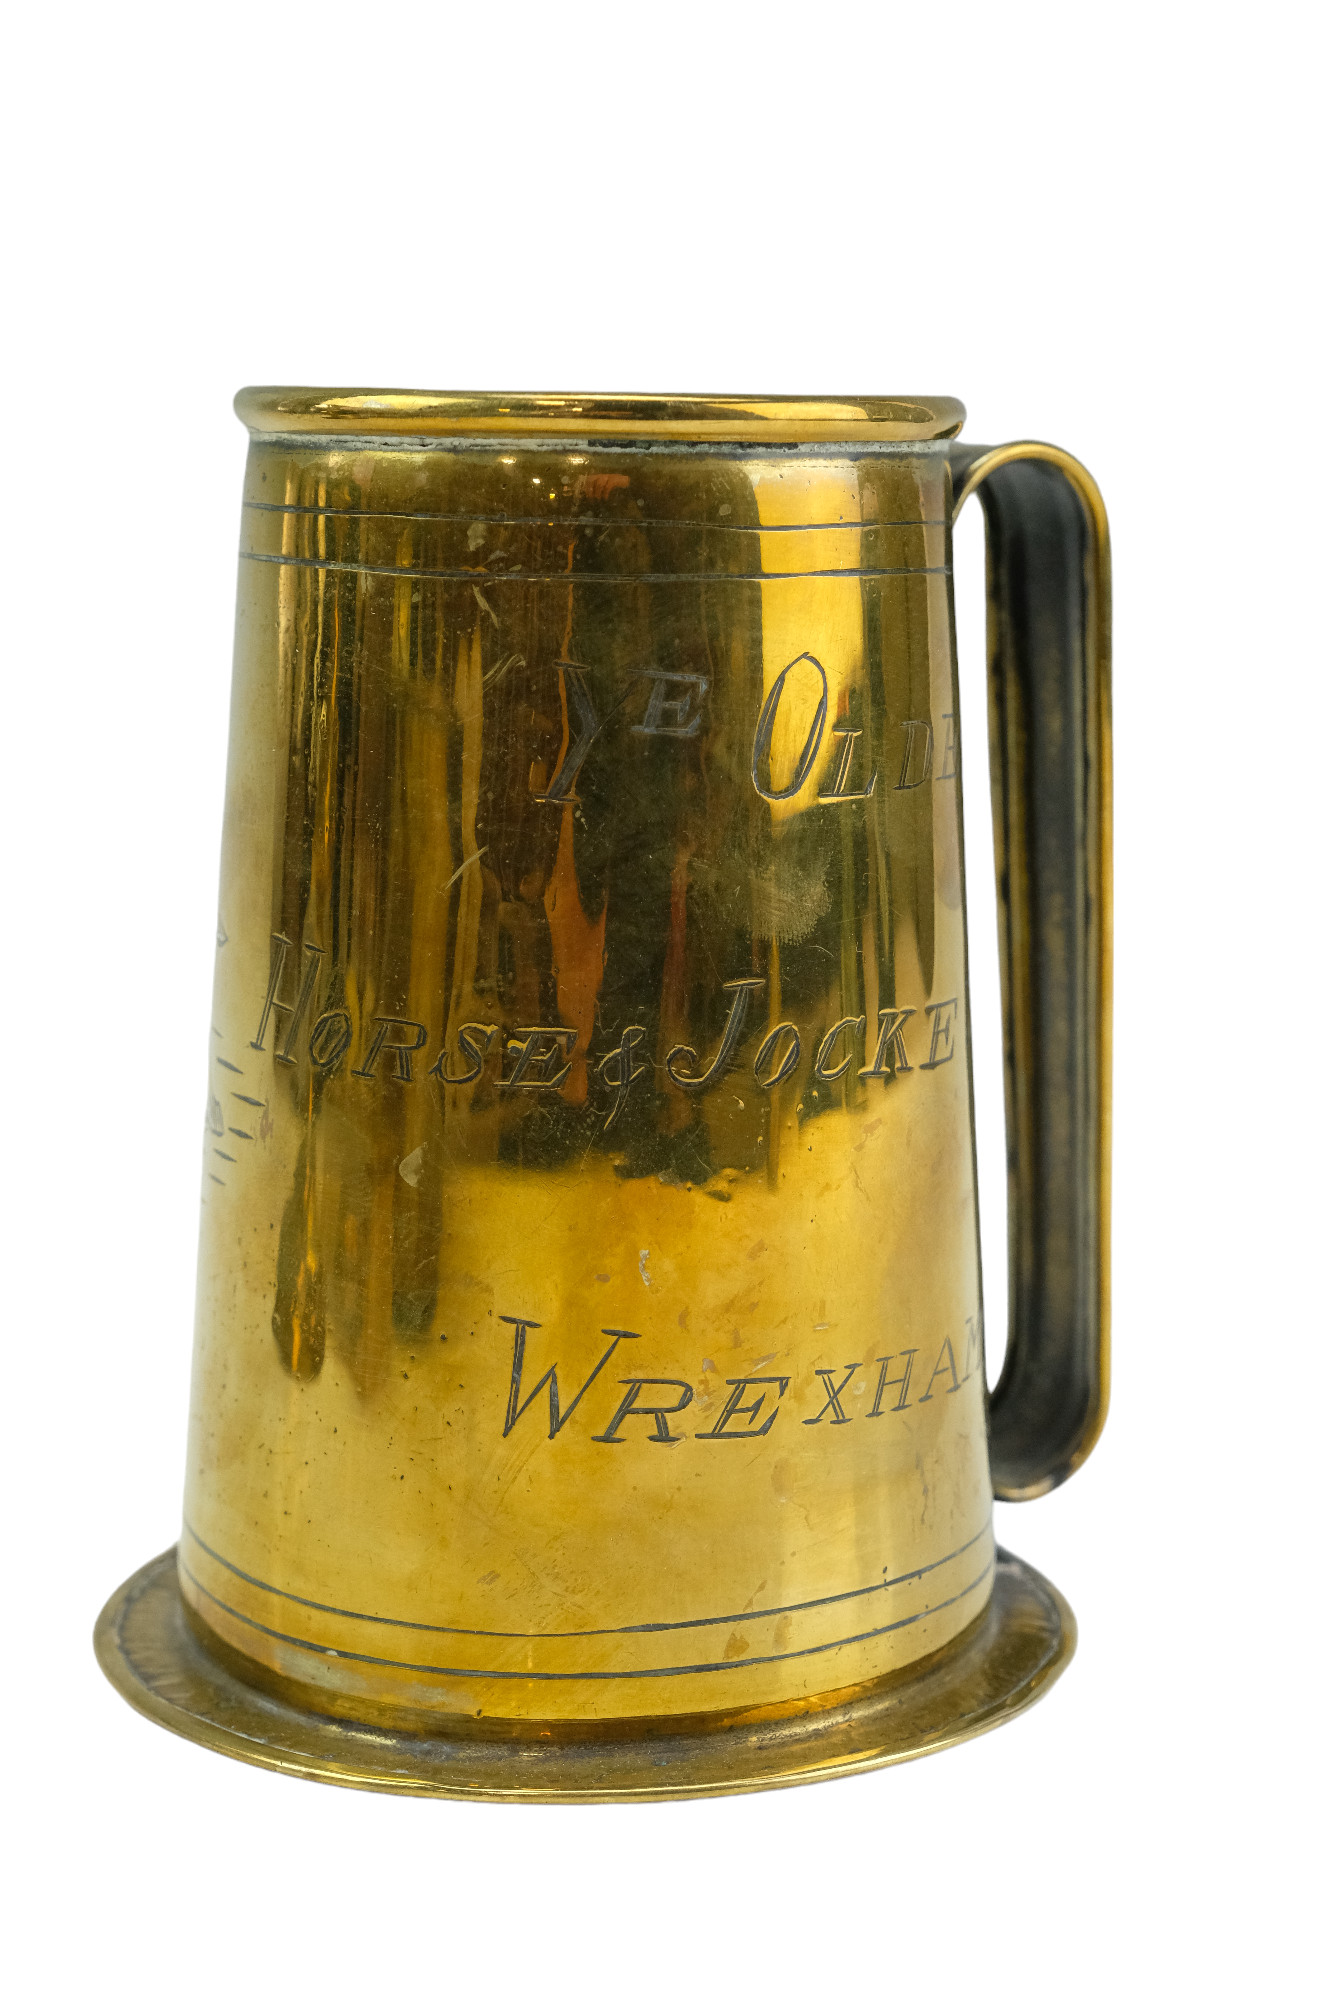 A vintage "Ye Olde Horse and Jockey - Wrexham" brass tankard together with a kettle, candlestick, - Image 2 of 2